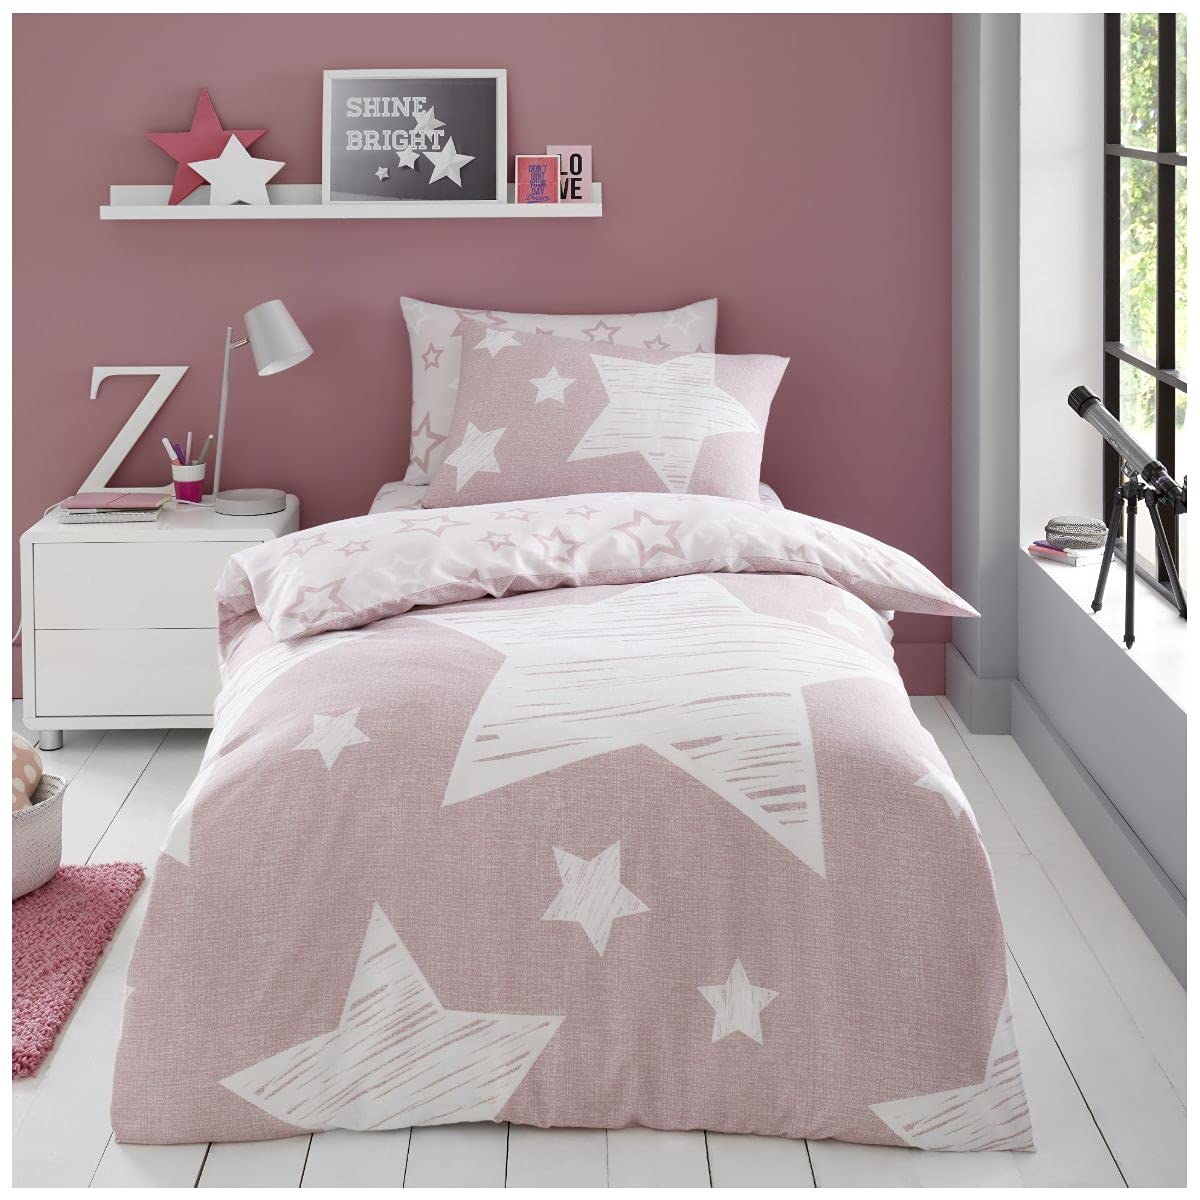 Premium Childrens Duvet Covers OR Toddler Fitted Sheets OR Kids Curtains For Bedroom, Blush Pink, Single